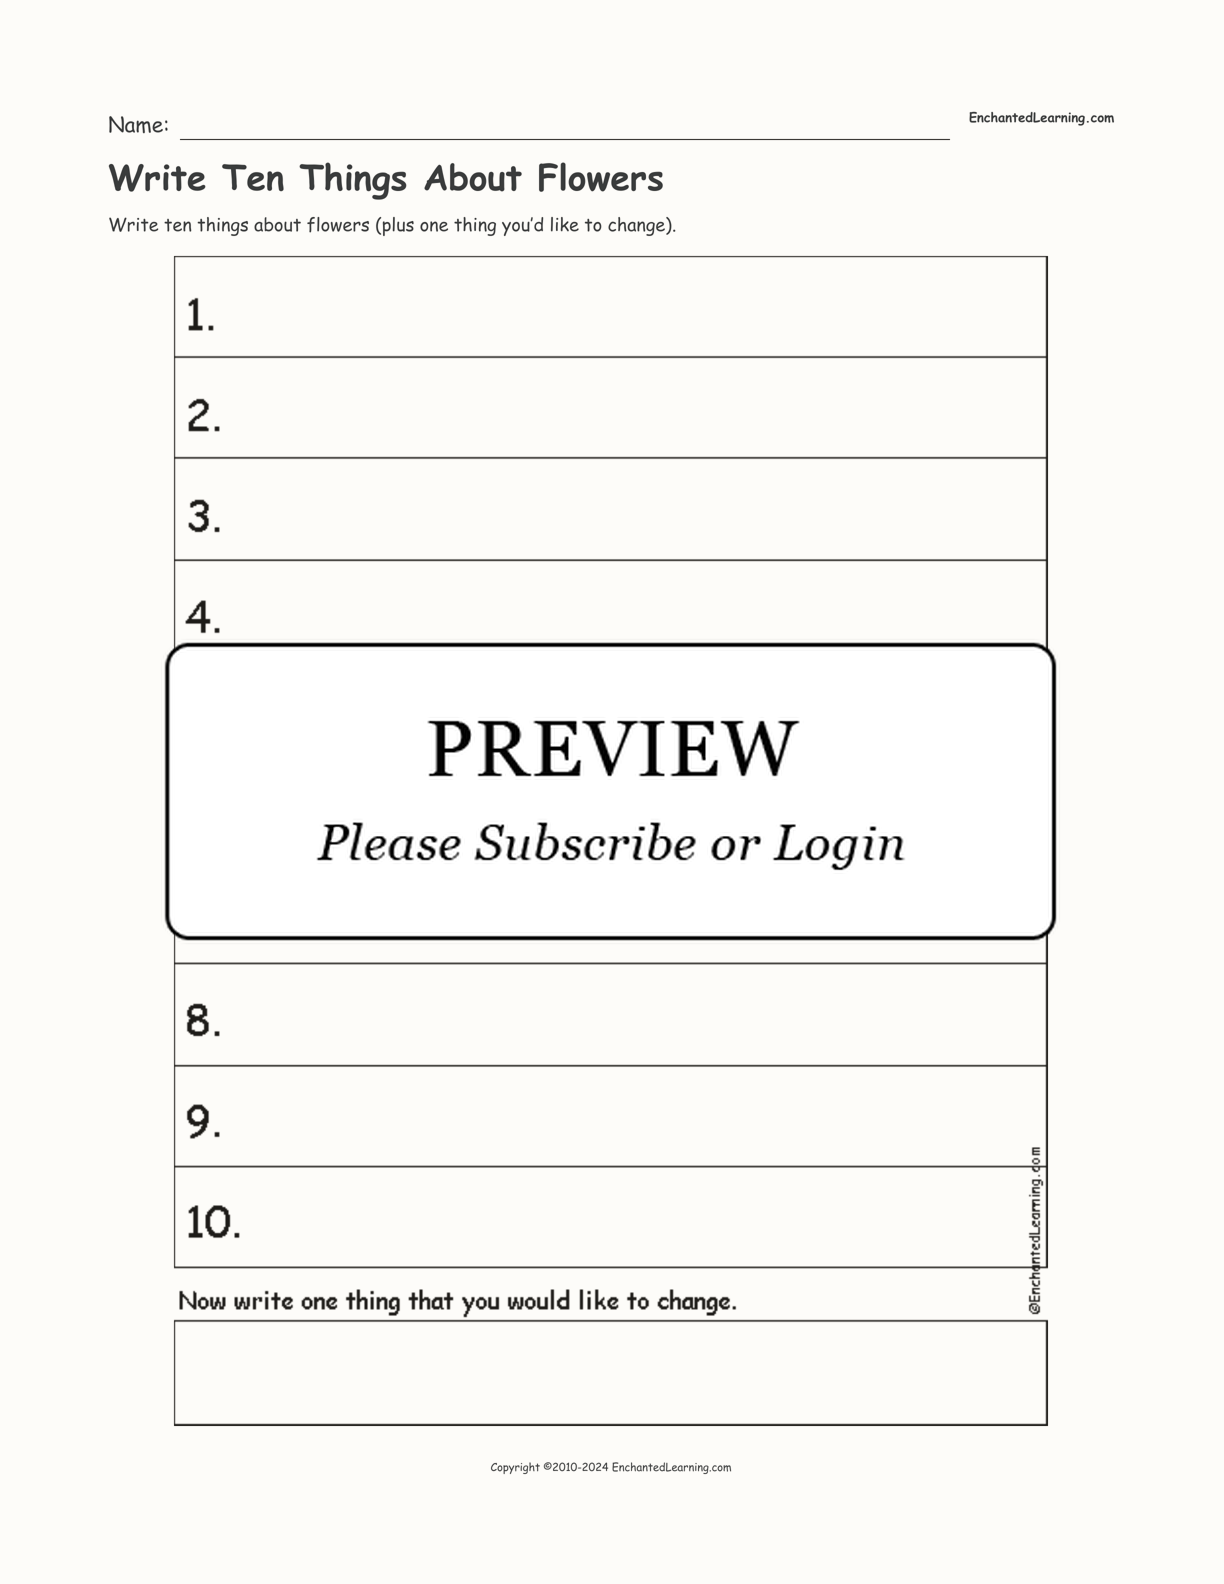 Write Ten Things About Flowers interactive worksheet page 1